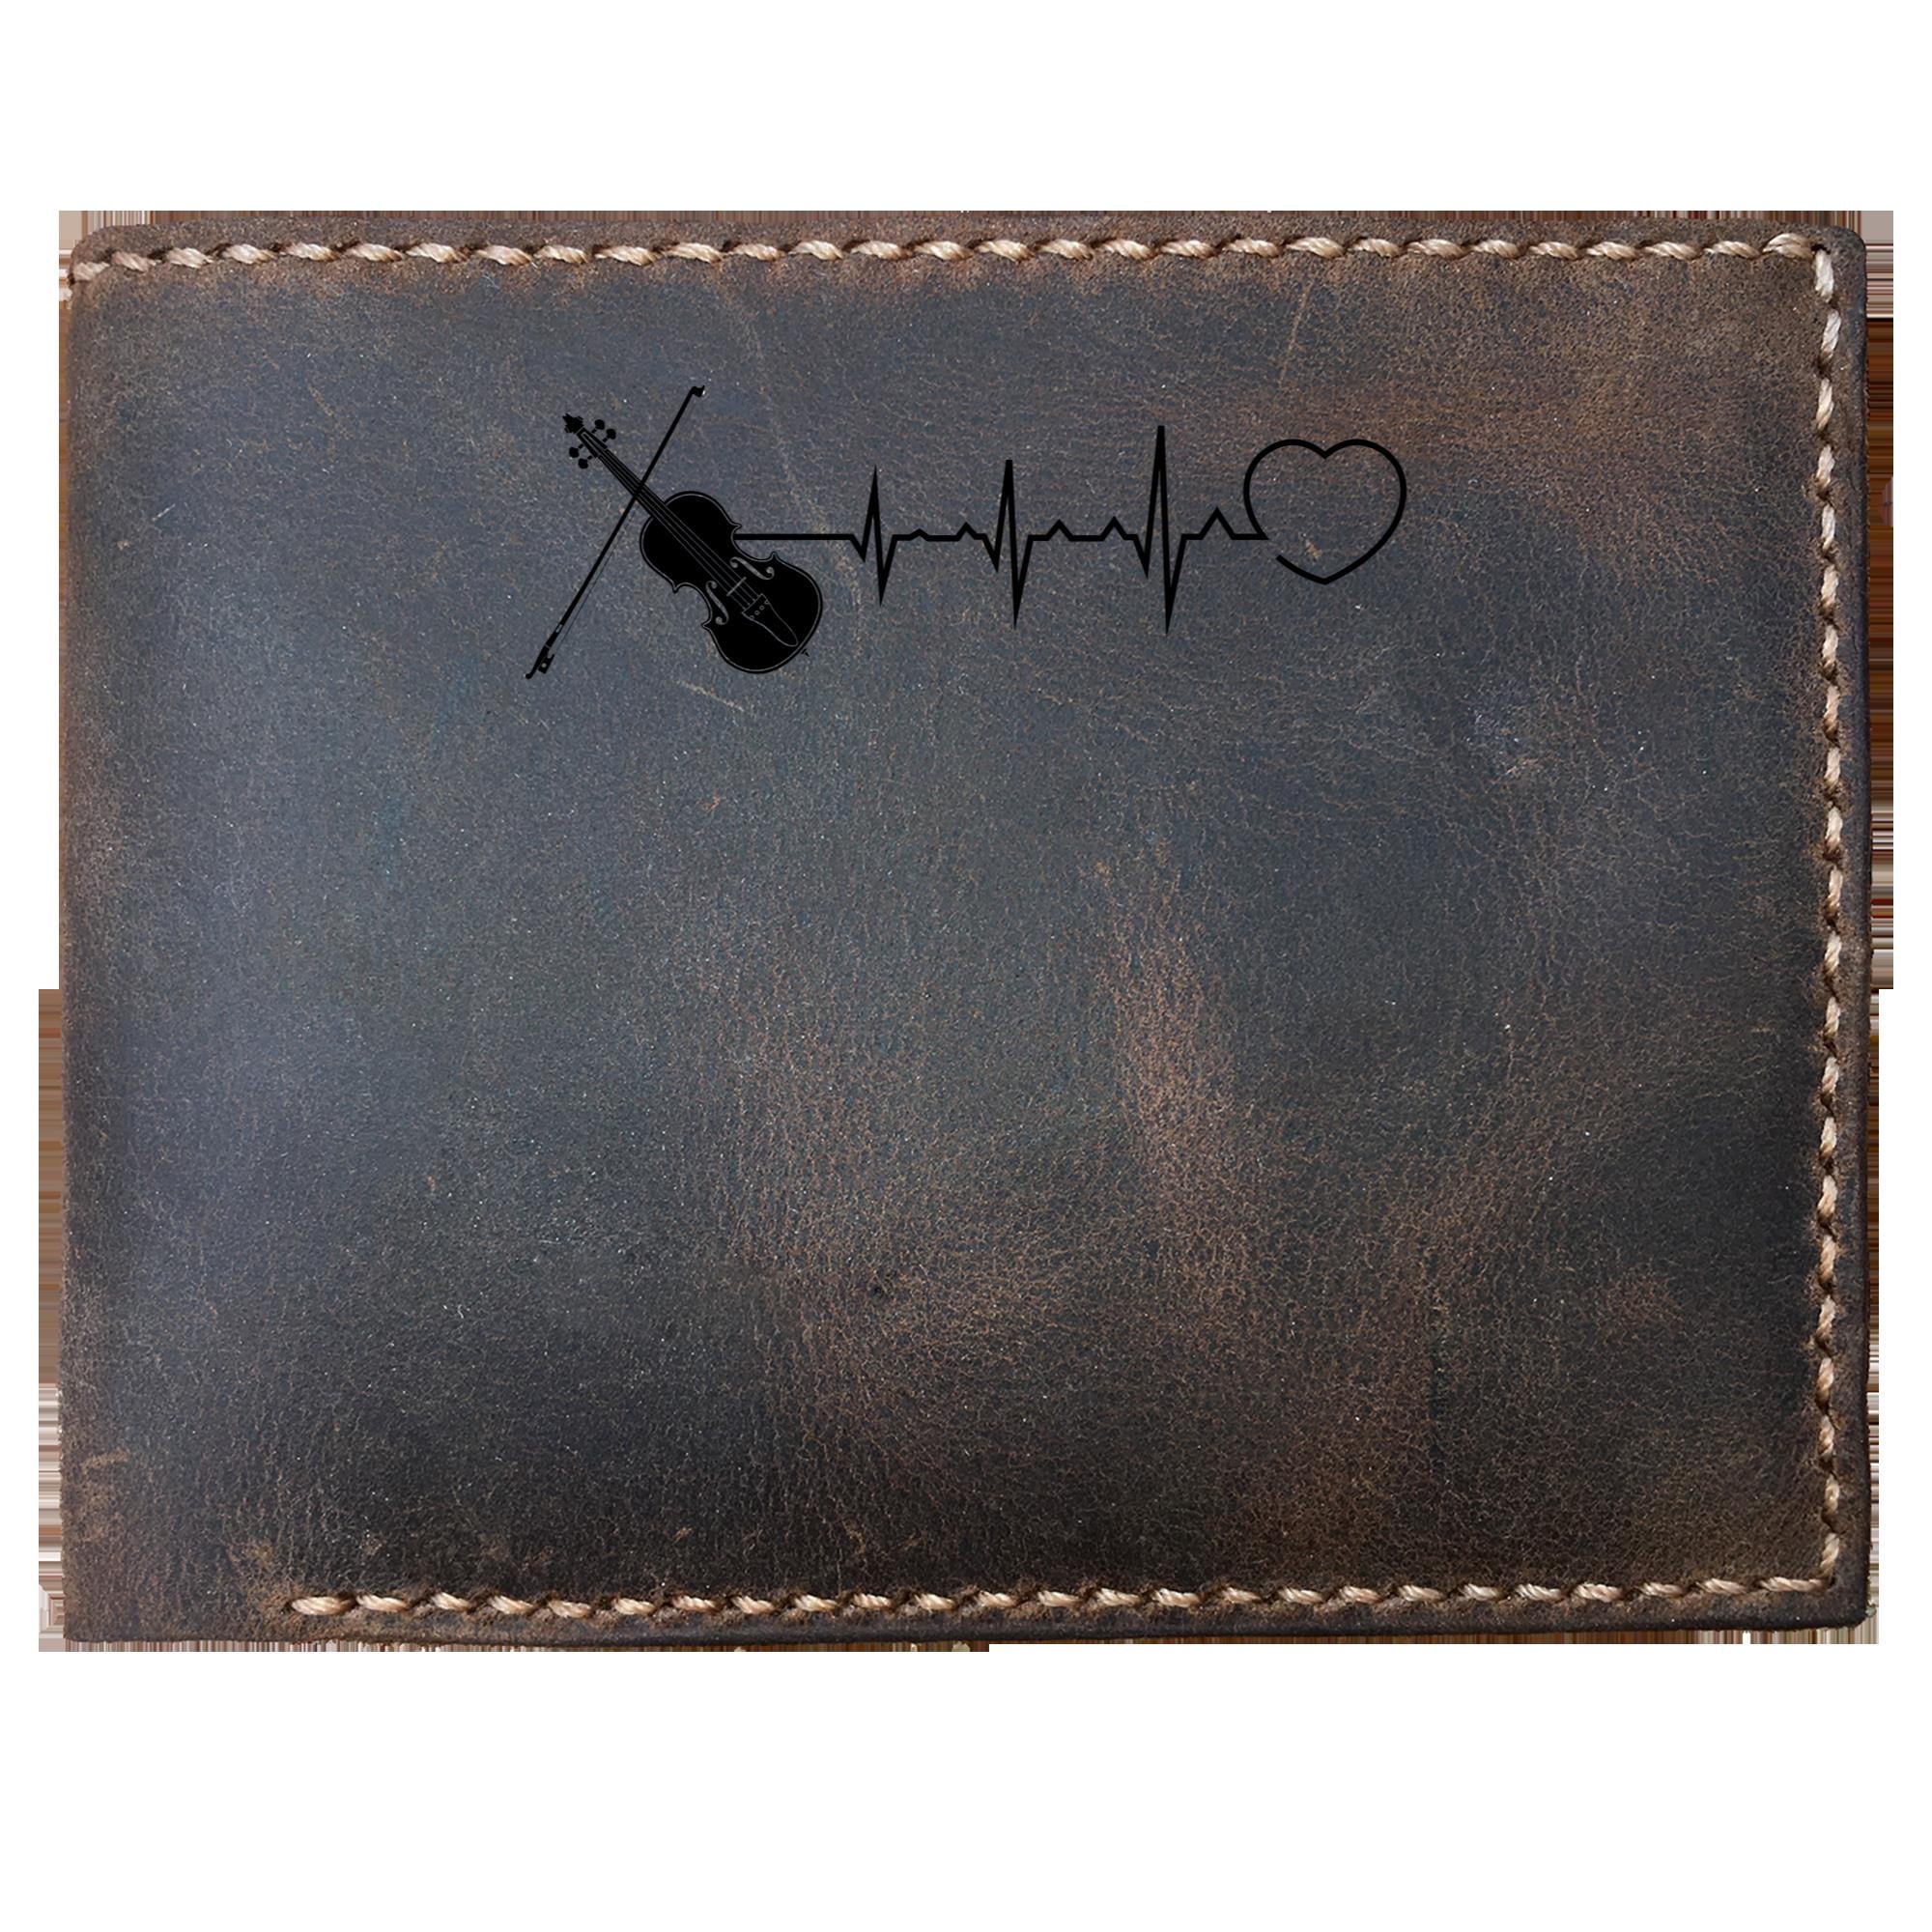 Skitongifts Funny Custom Laser Engraved Bifold Leather Wallet For Men, Violin Heartbeat Nice